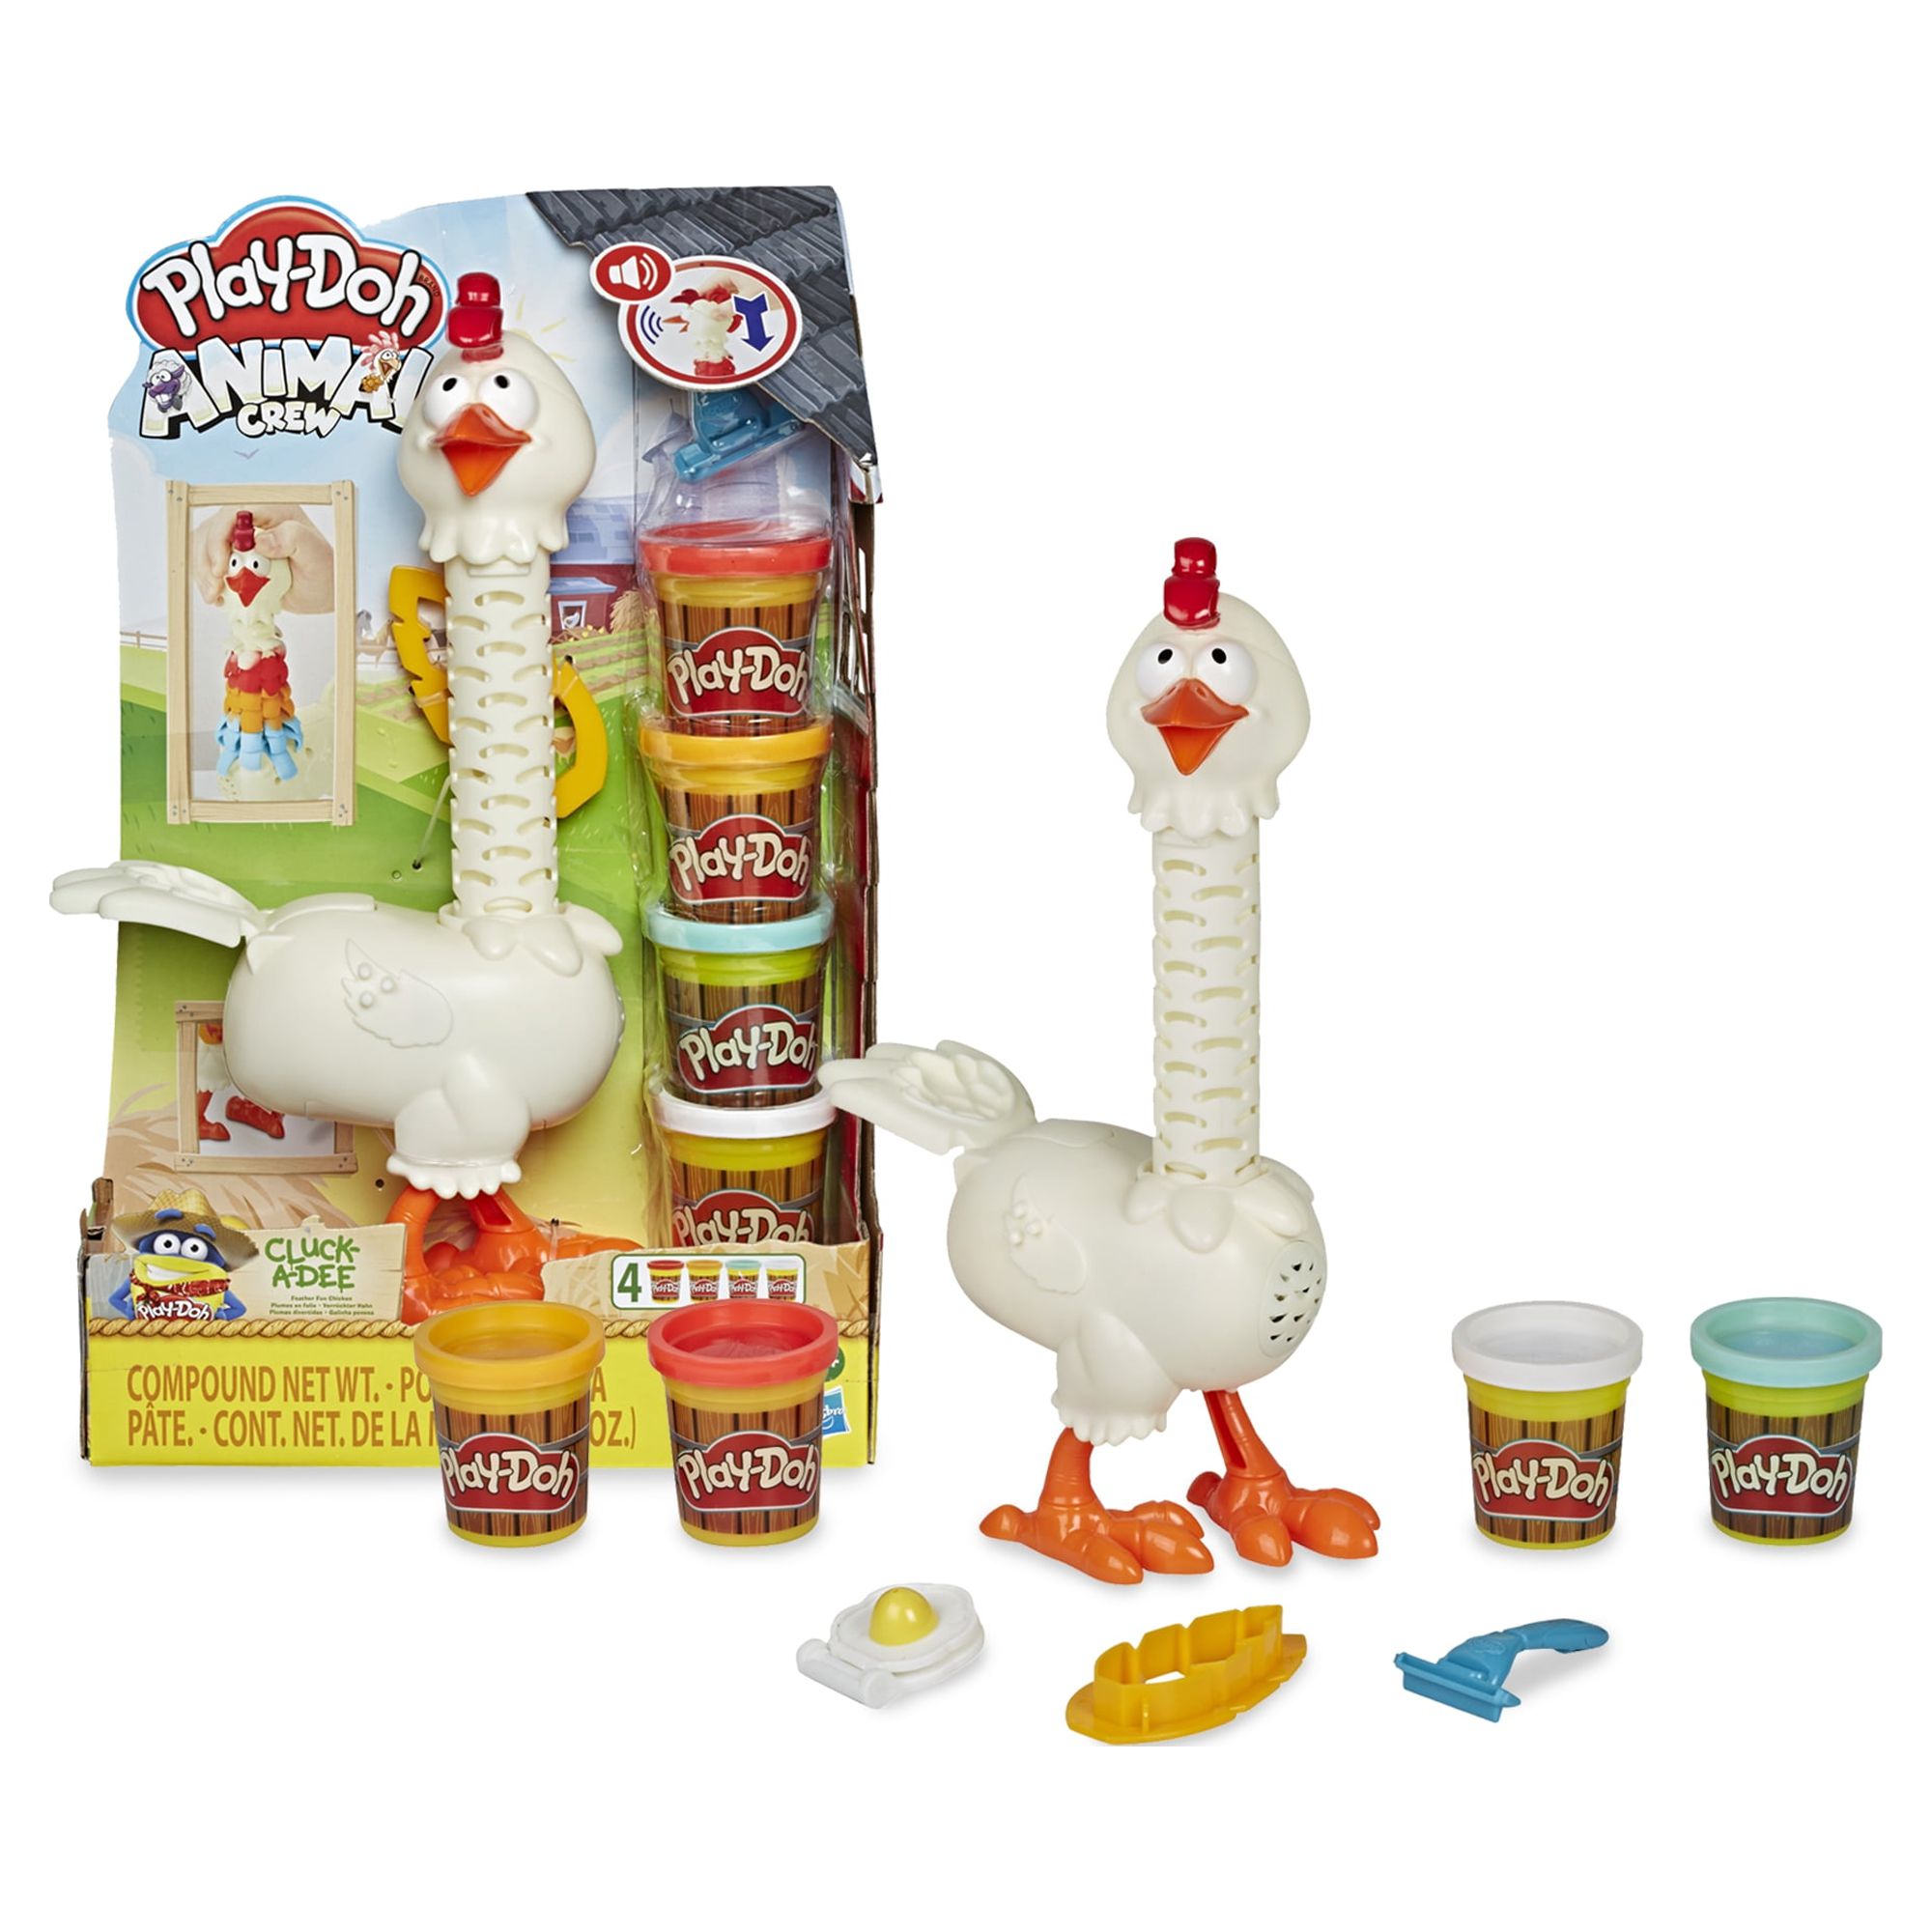 Play-Doh Animal Crew Cluck-a-Dee Feather Fun Chicken Toy Farm Animal Playset with 4 Non-Toxic Play-Doh Colors - image 1 of 11